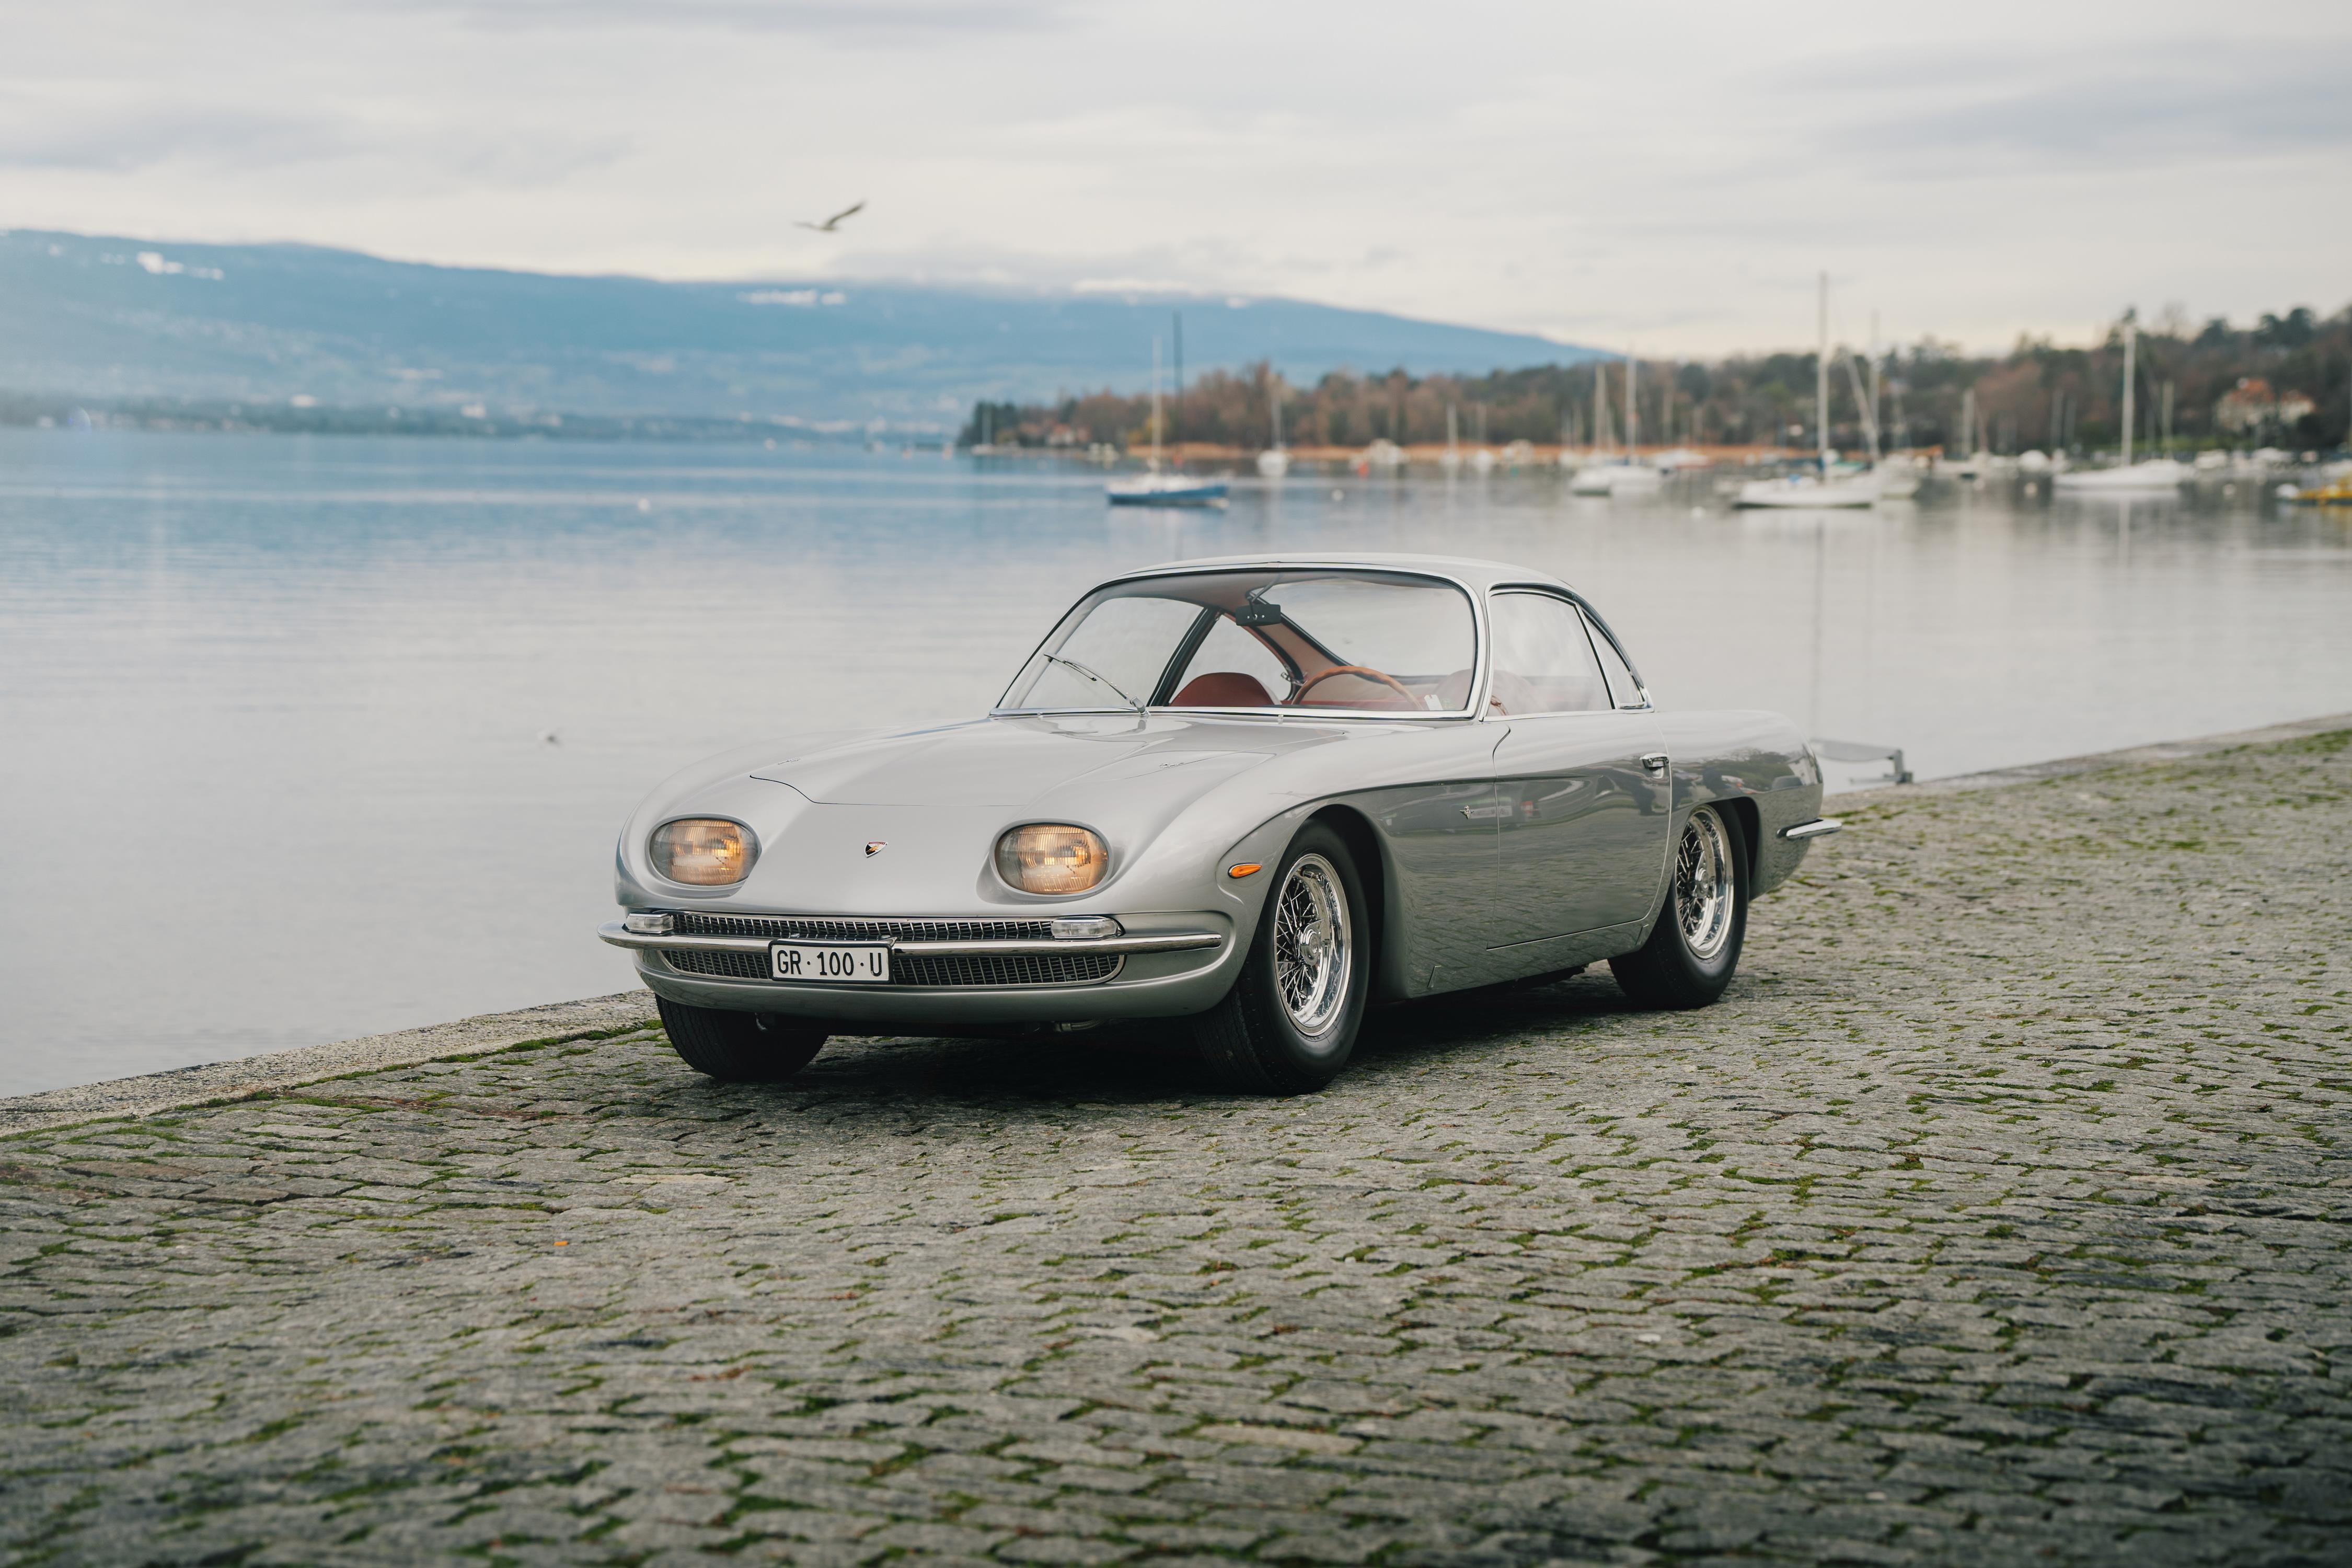 This is the Oldest Existing Lamborghini, Appearing in its Hometown After Certified Restoration